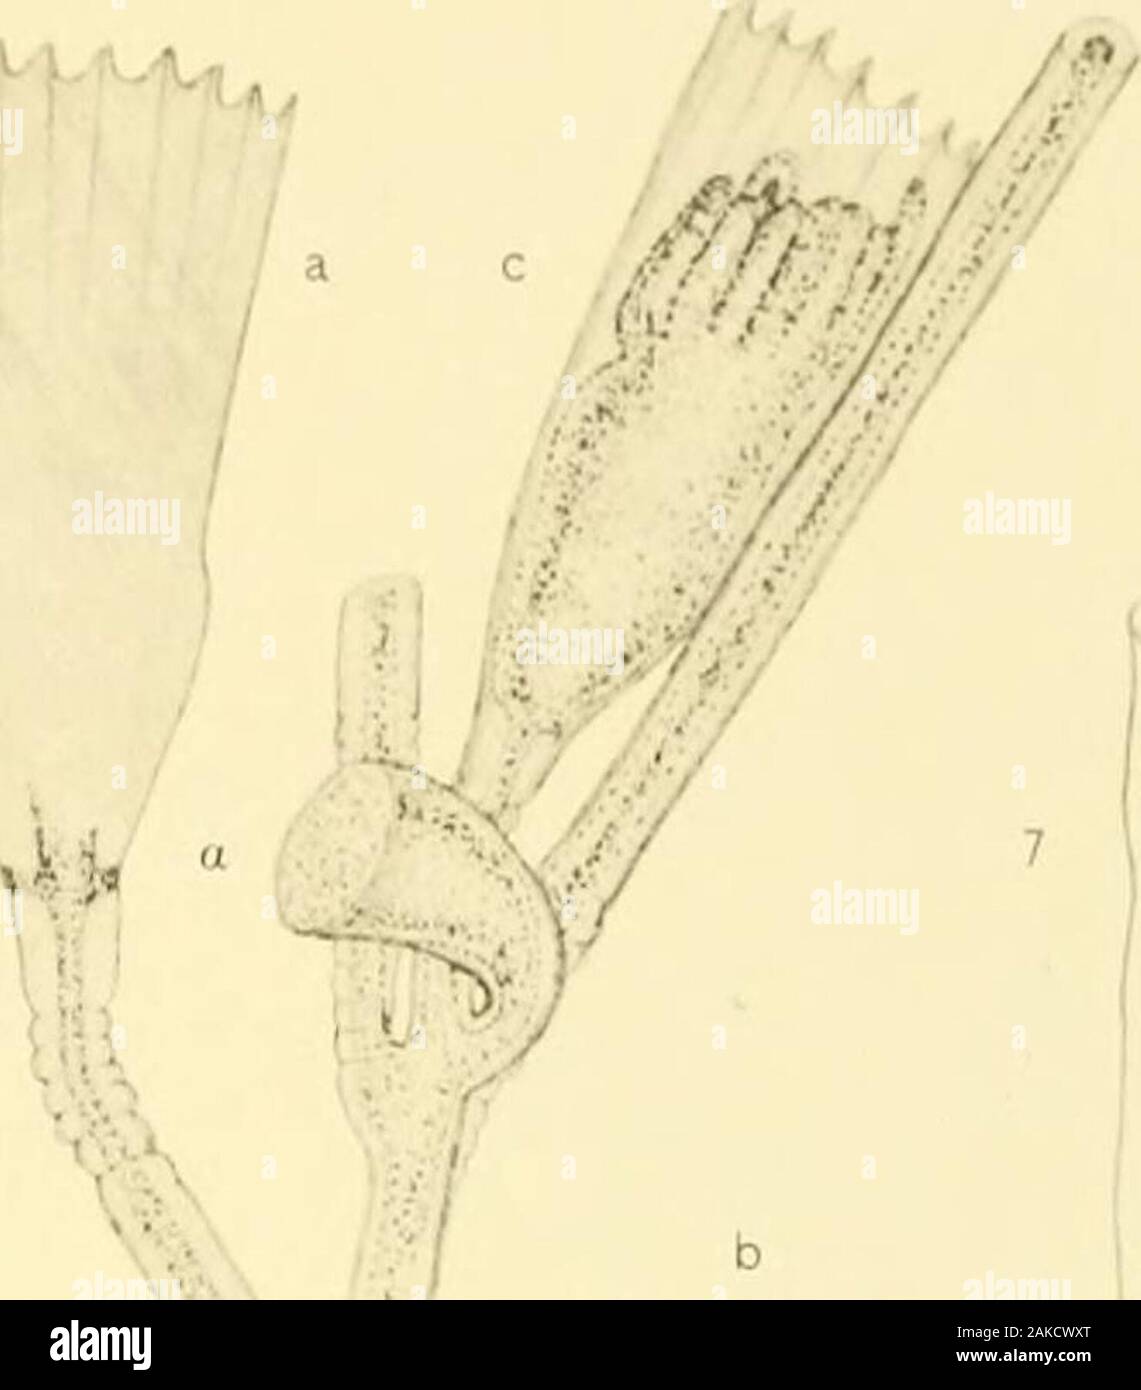 Memoirs of the Museum of Comparative Zoölogy, at Harvard College, Cambridge, Mass . enlarged, x HG.Fig. 4. The same specimen as figure 2. x GO. Obelia (?) sp., page 10.Fig. 5. Natural size, on Thuiaria tubuliformis.Fig. 6. An entire colony, x 116.Fig. 7. The distal end of a hydrotheca. Albatross K. Pacific K. Hvdn i P . MEUOTYPE CO., BOSTON. Plate 6. Plate 6. Obelia striata, page 9. Fig. 1. A part of a colony; a, young gonothecpe ; b, a hydrotheca much less than theusual size ; c, a hydrotheca of the normal size and shape ; d and e, hydrothecaefrom the same stem showing a transverse constrict Stock Photo